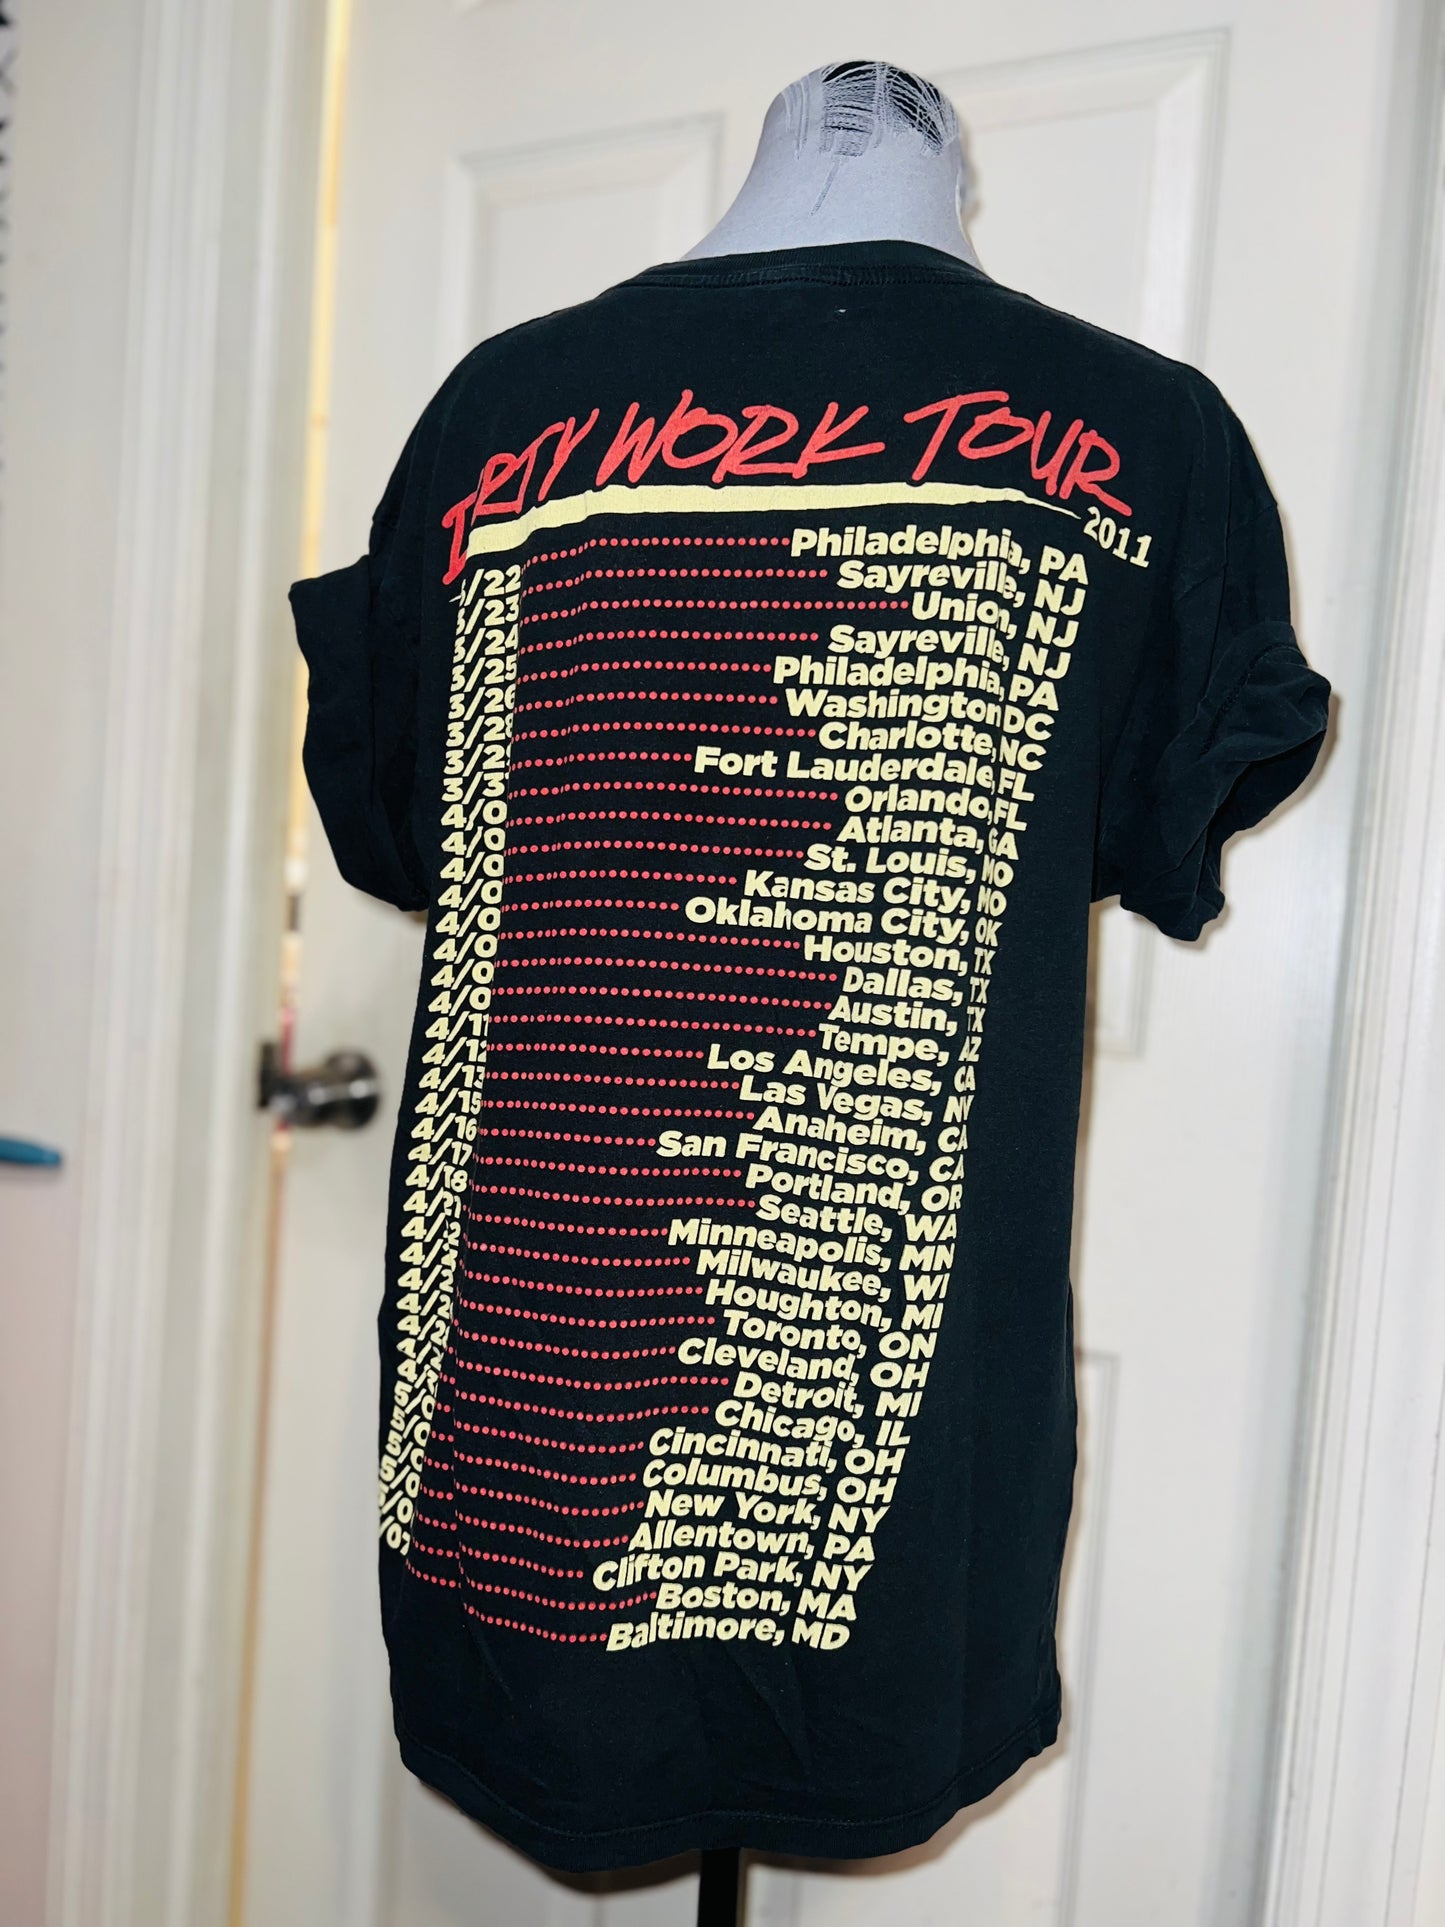 All Time Low Vintage Oversized Double Sided Tee